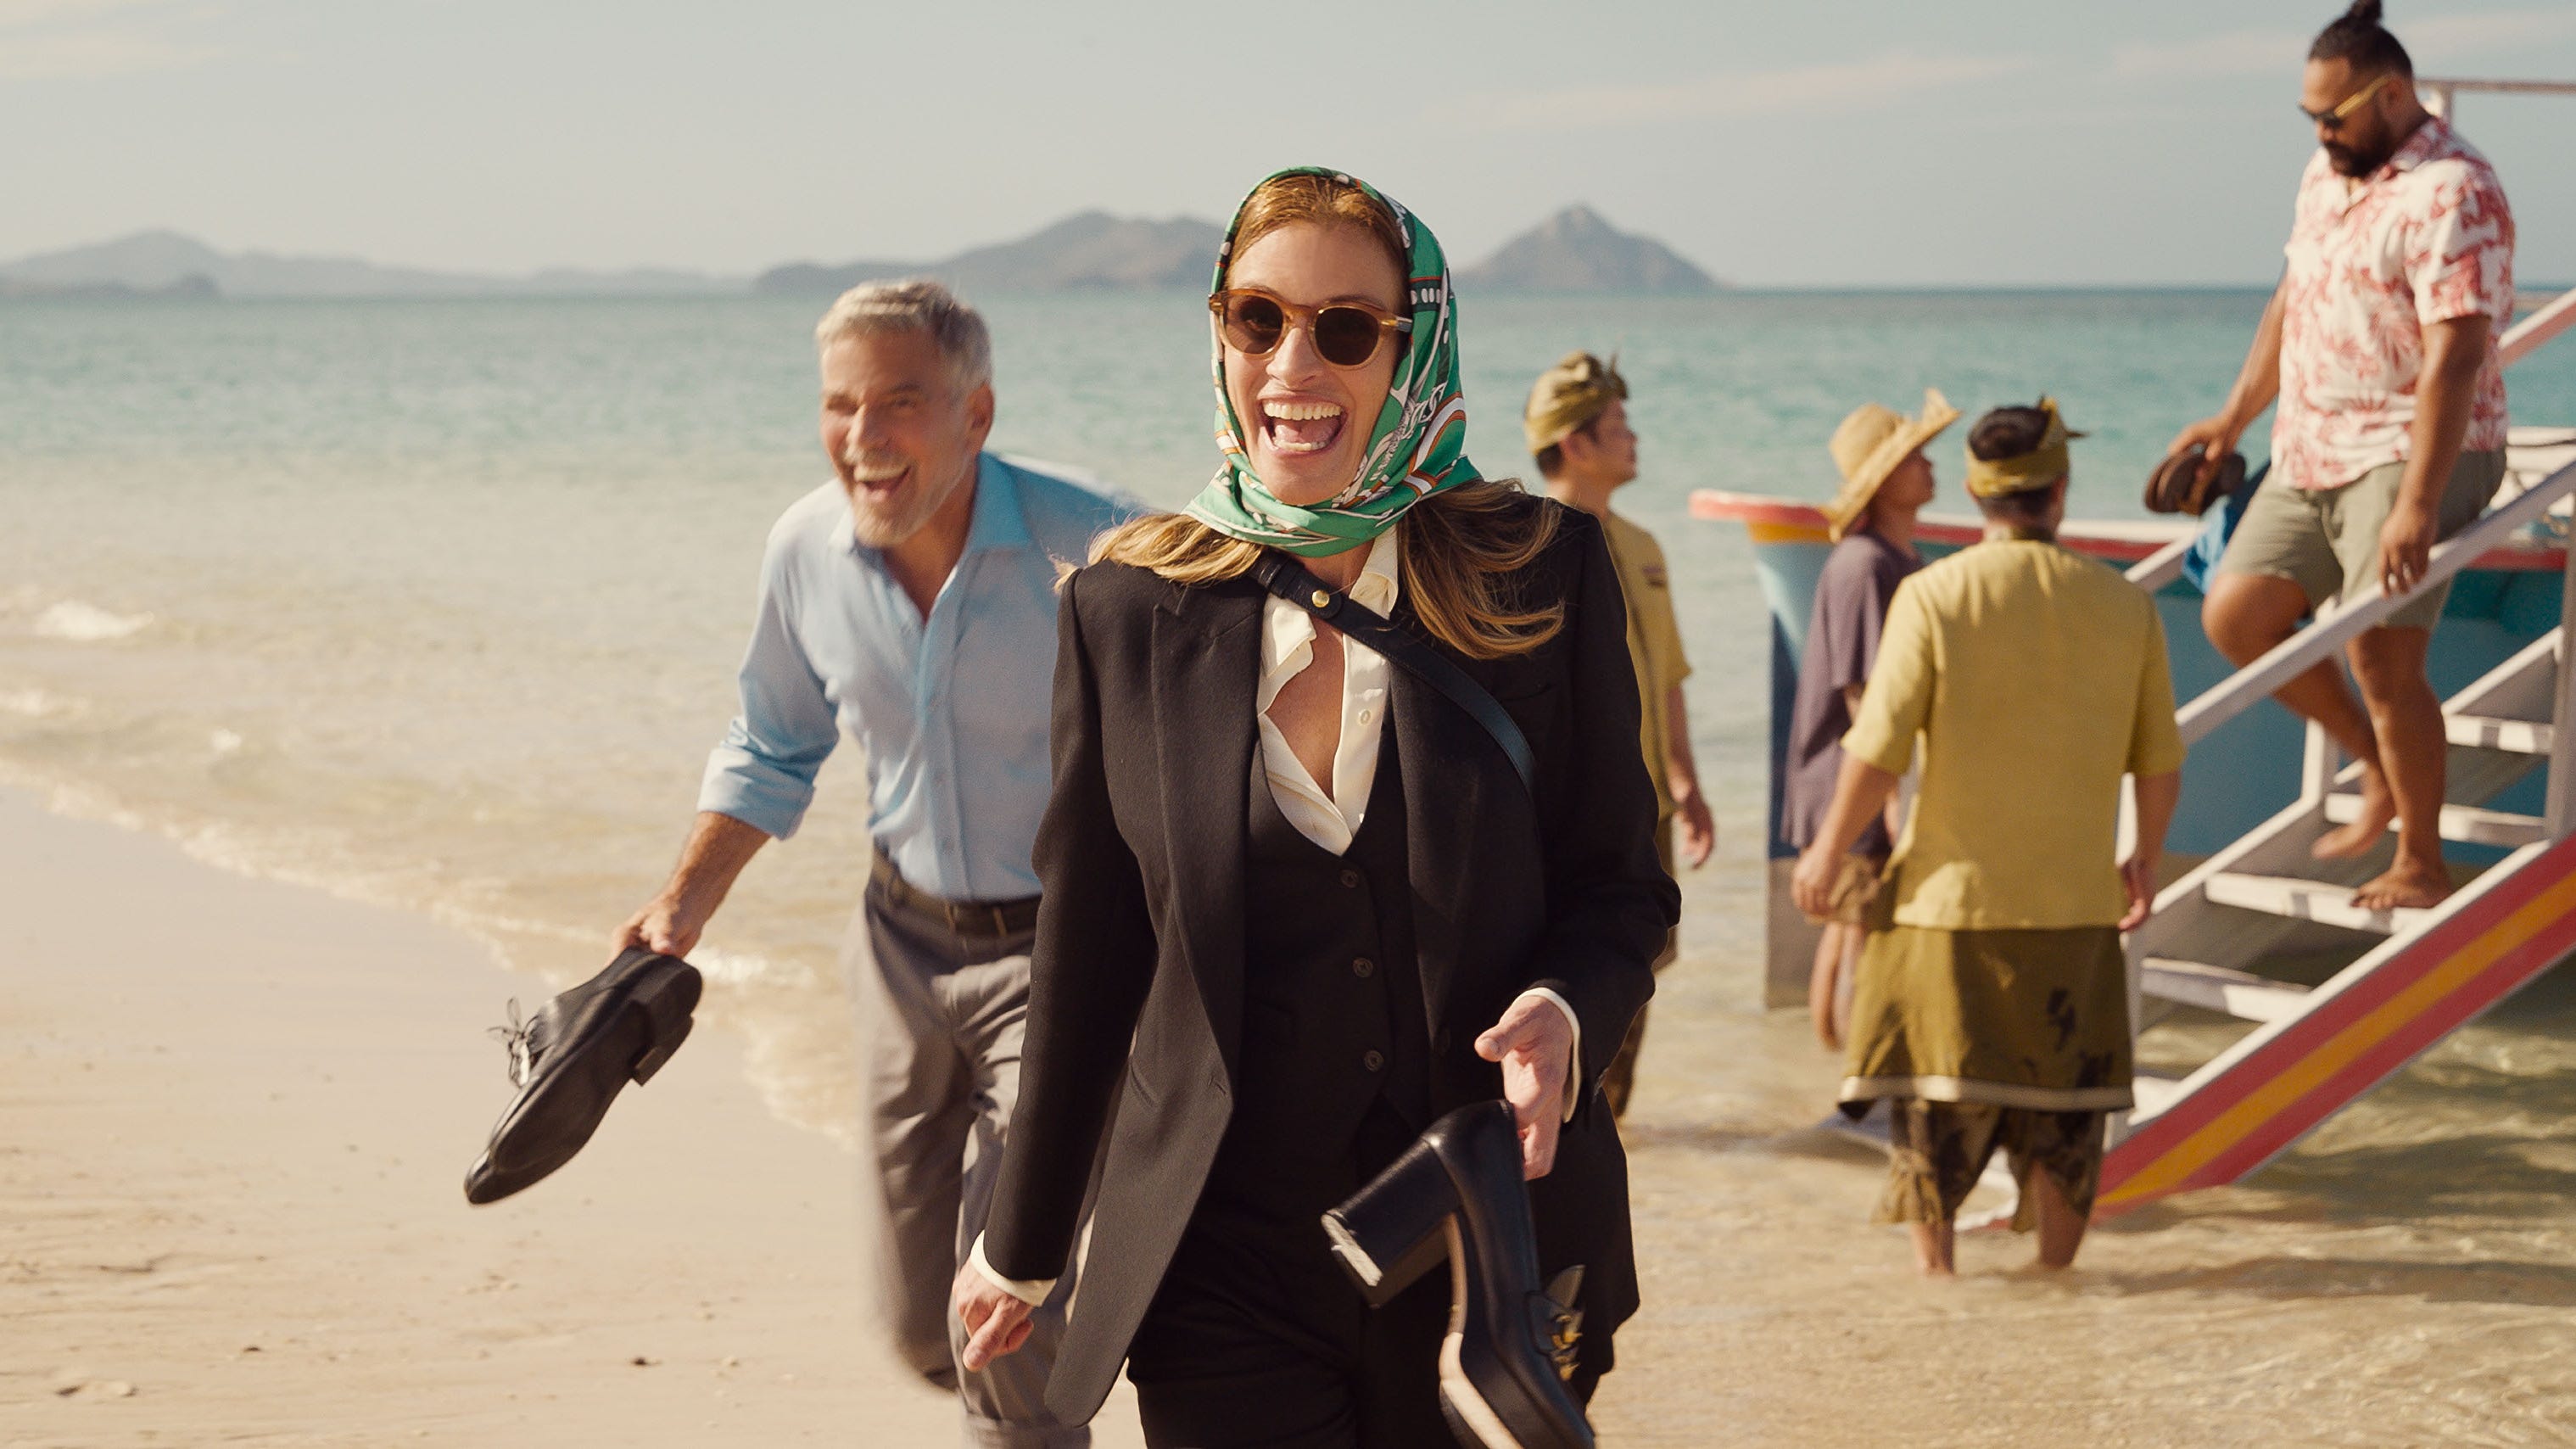 'Ticket to Paradise' review: Julia Roberts, George Clooney's iffy trip